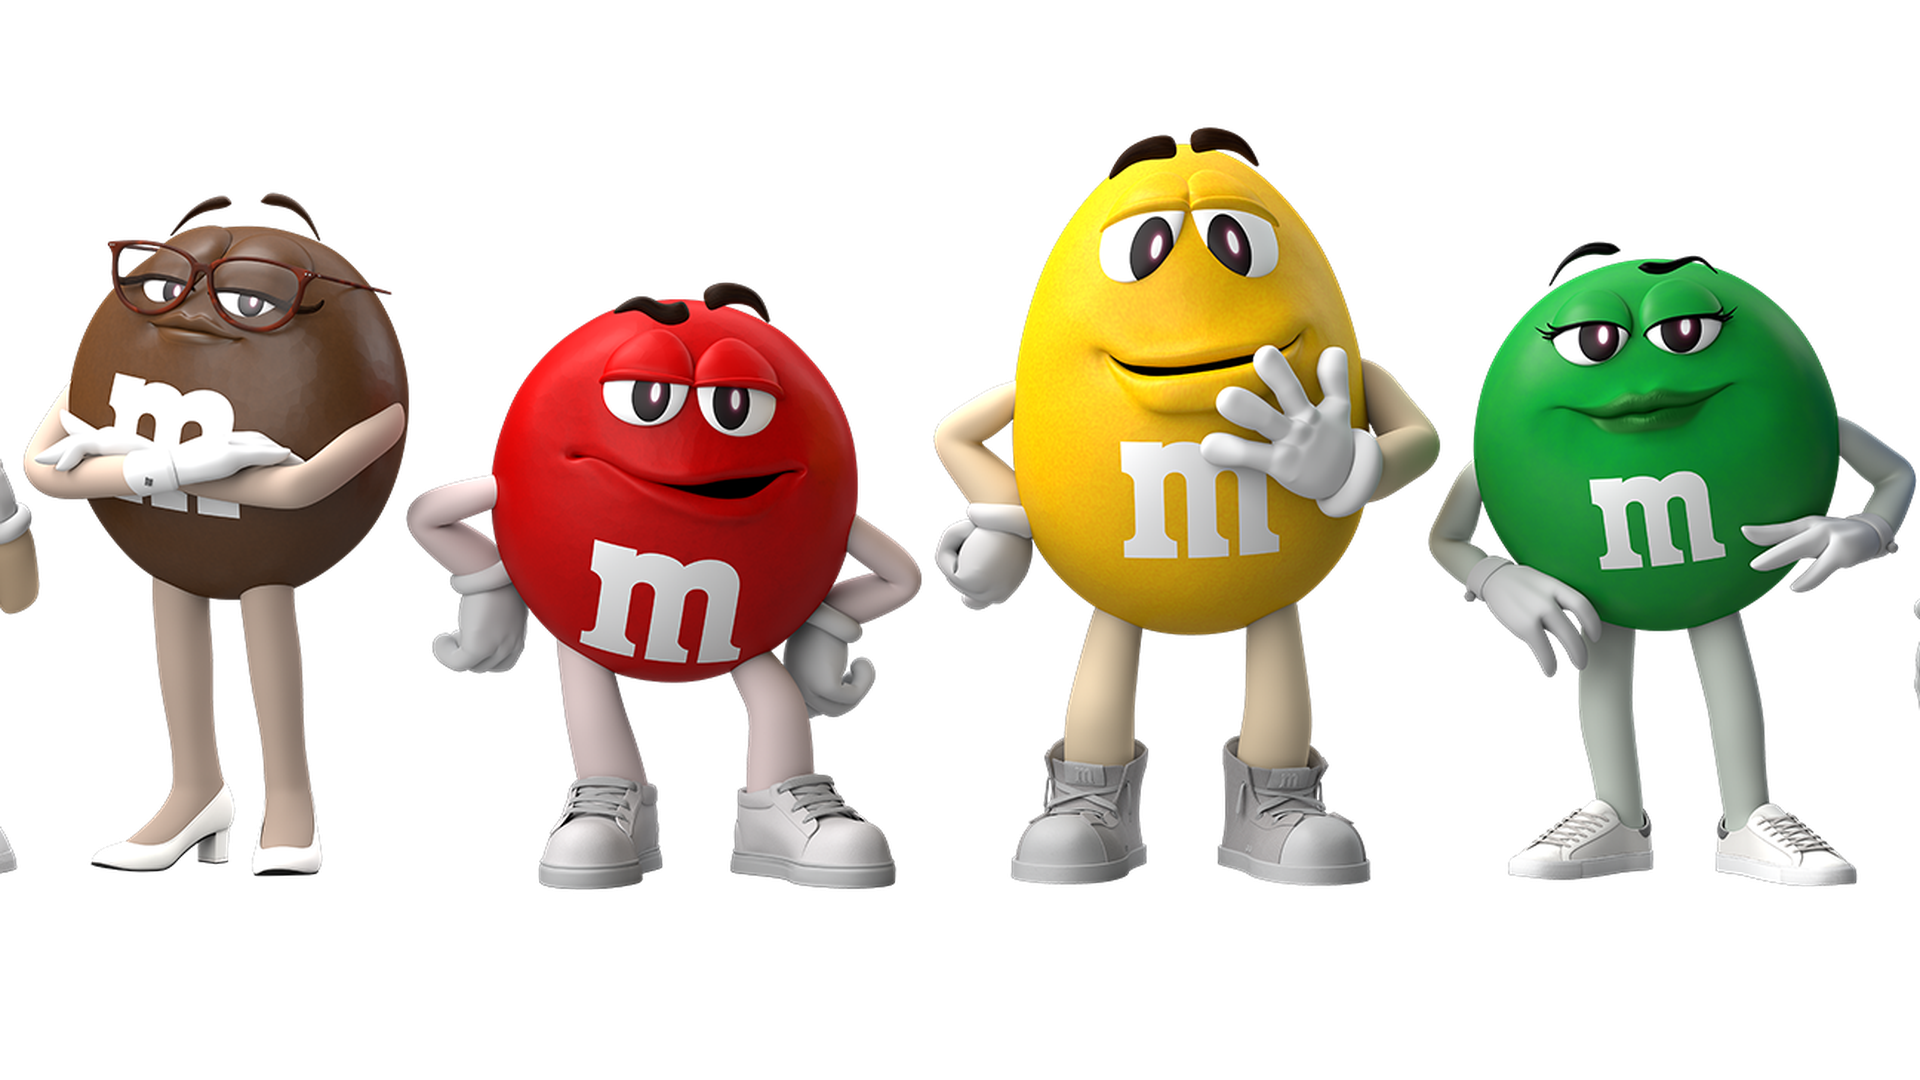 Animated M&M characters with white shoes stand side by side.